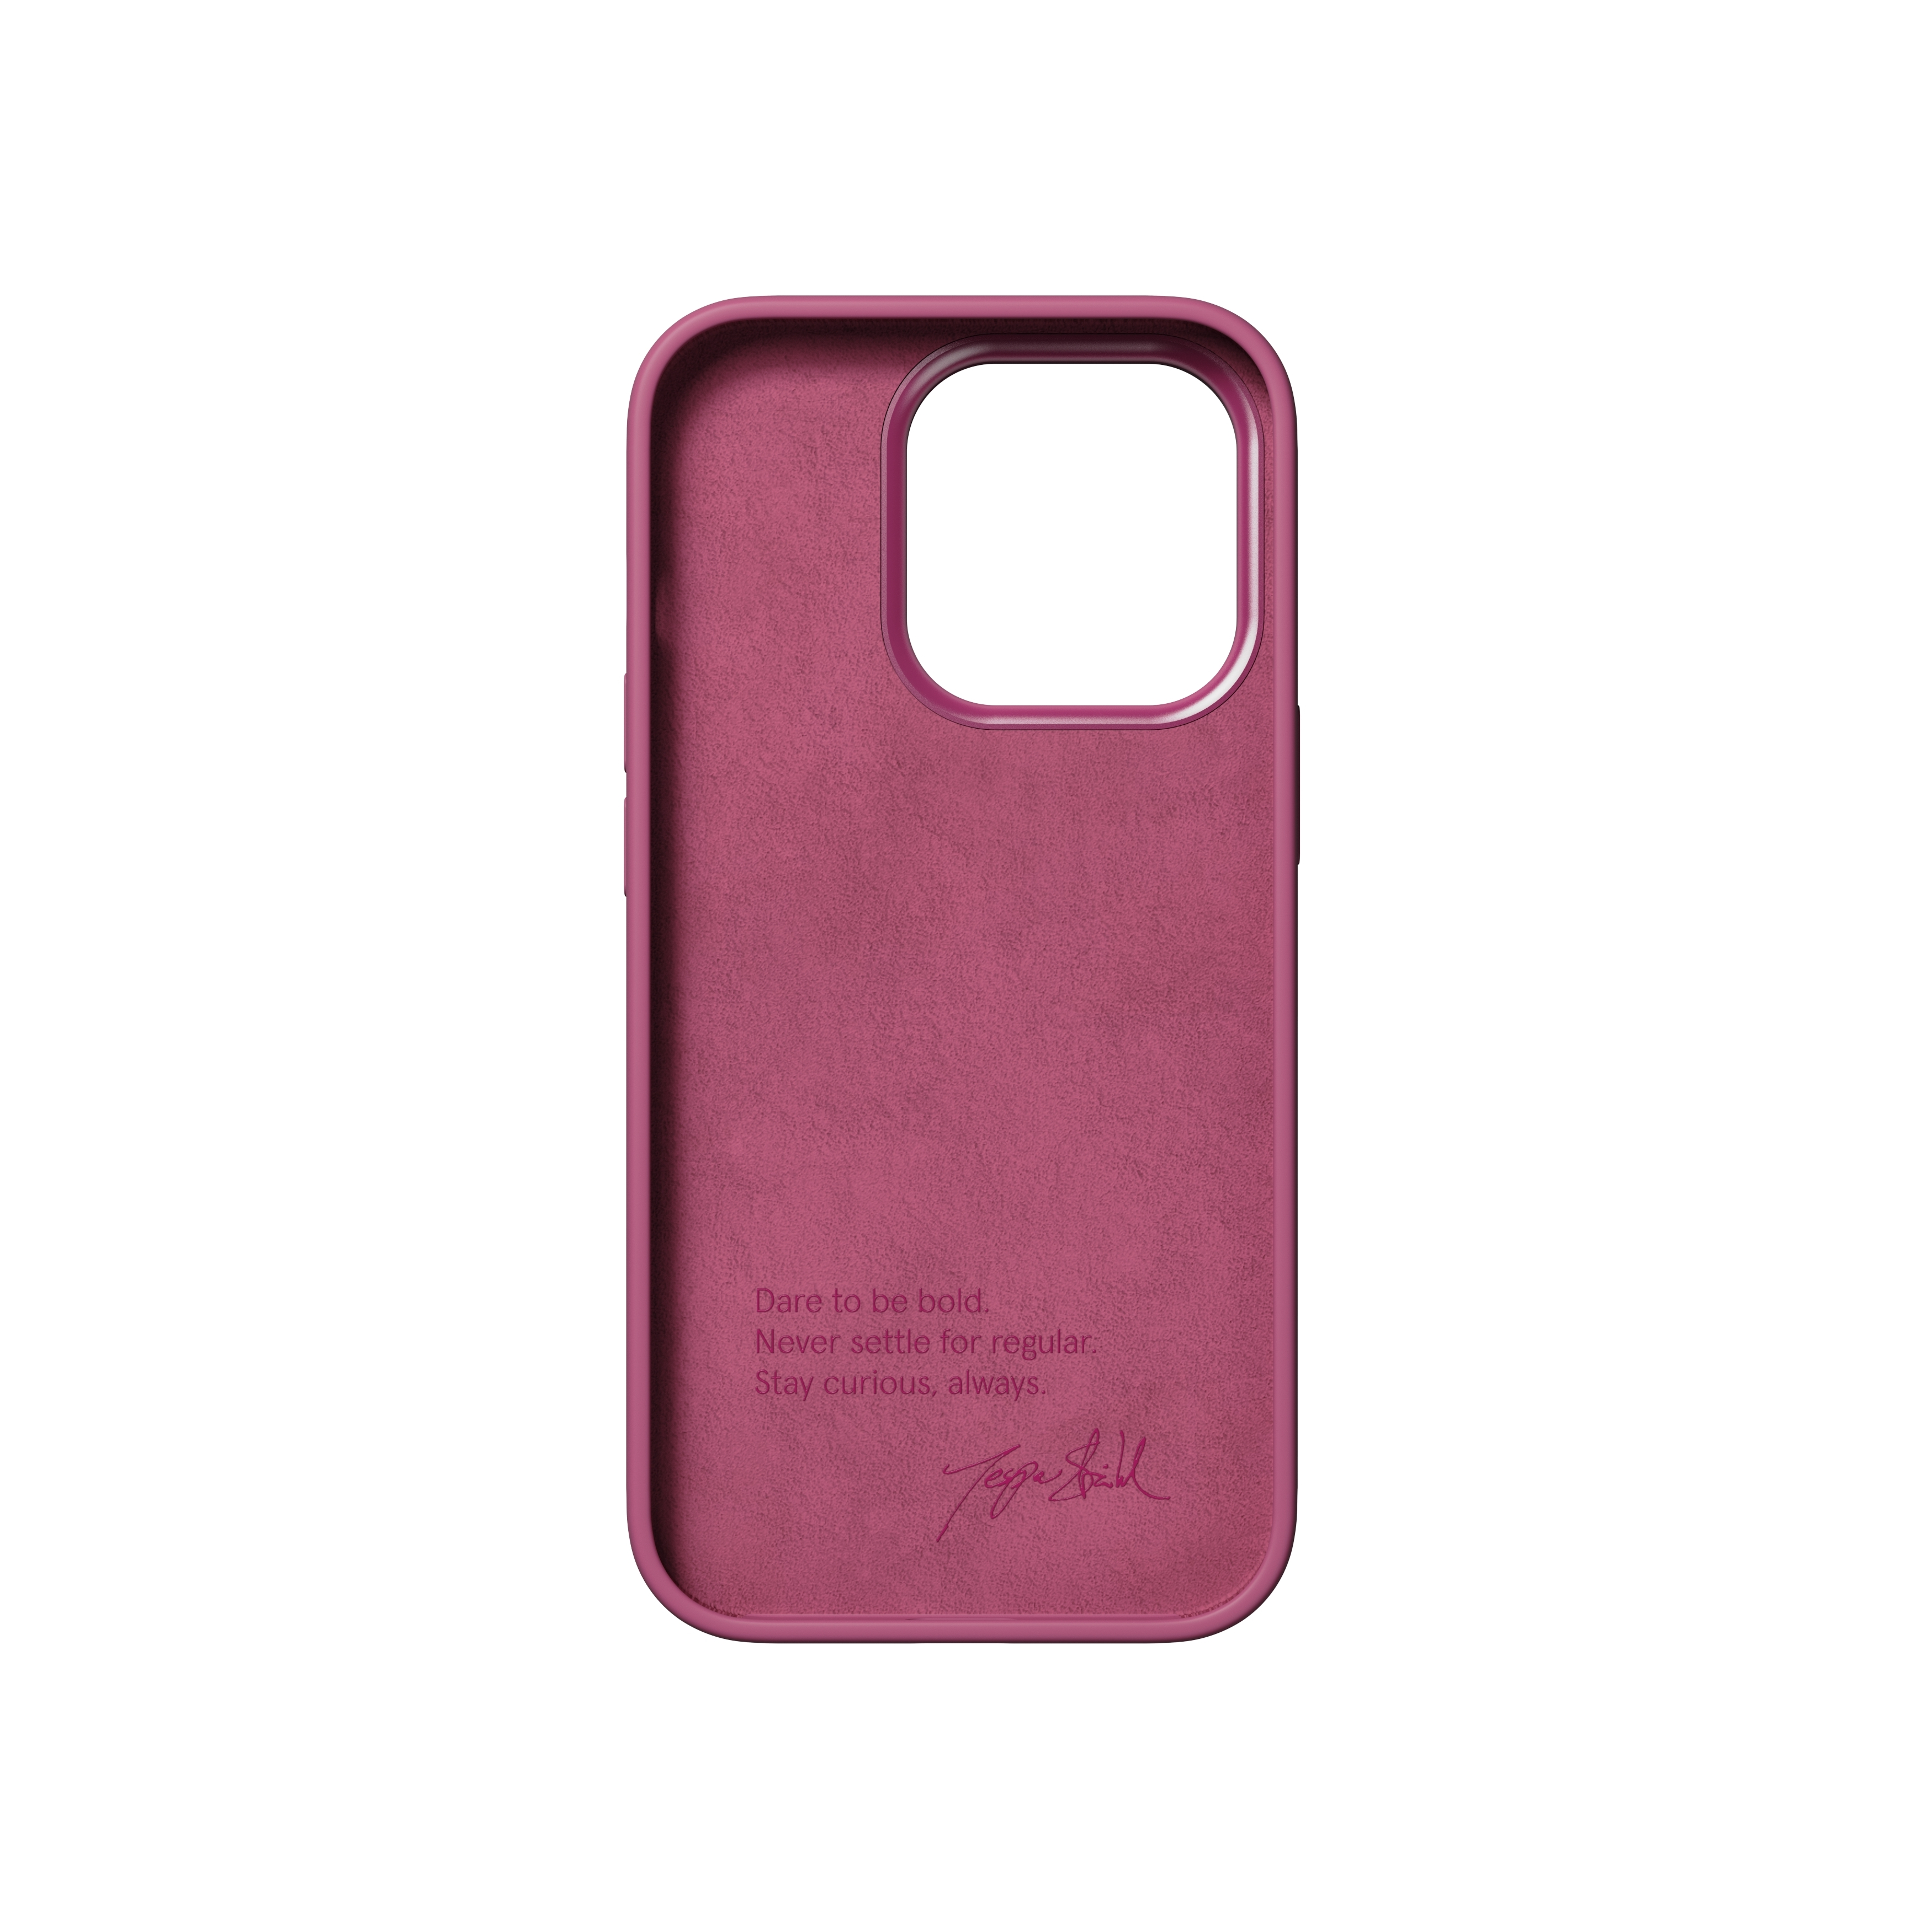 Backcover, Case, APPLE, PRO, NUDIENT PINK IPHONE Bold 14